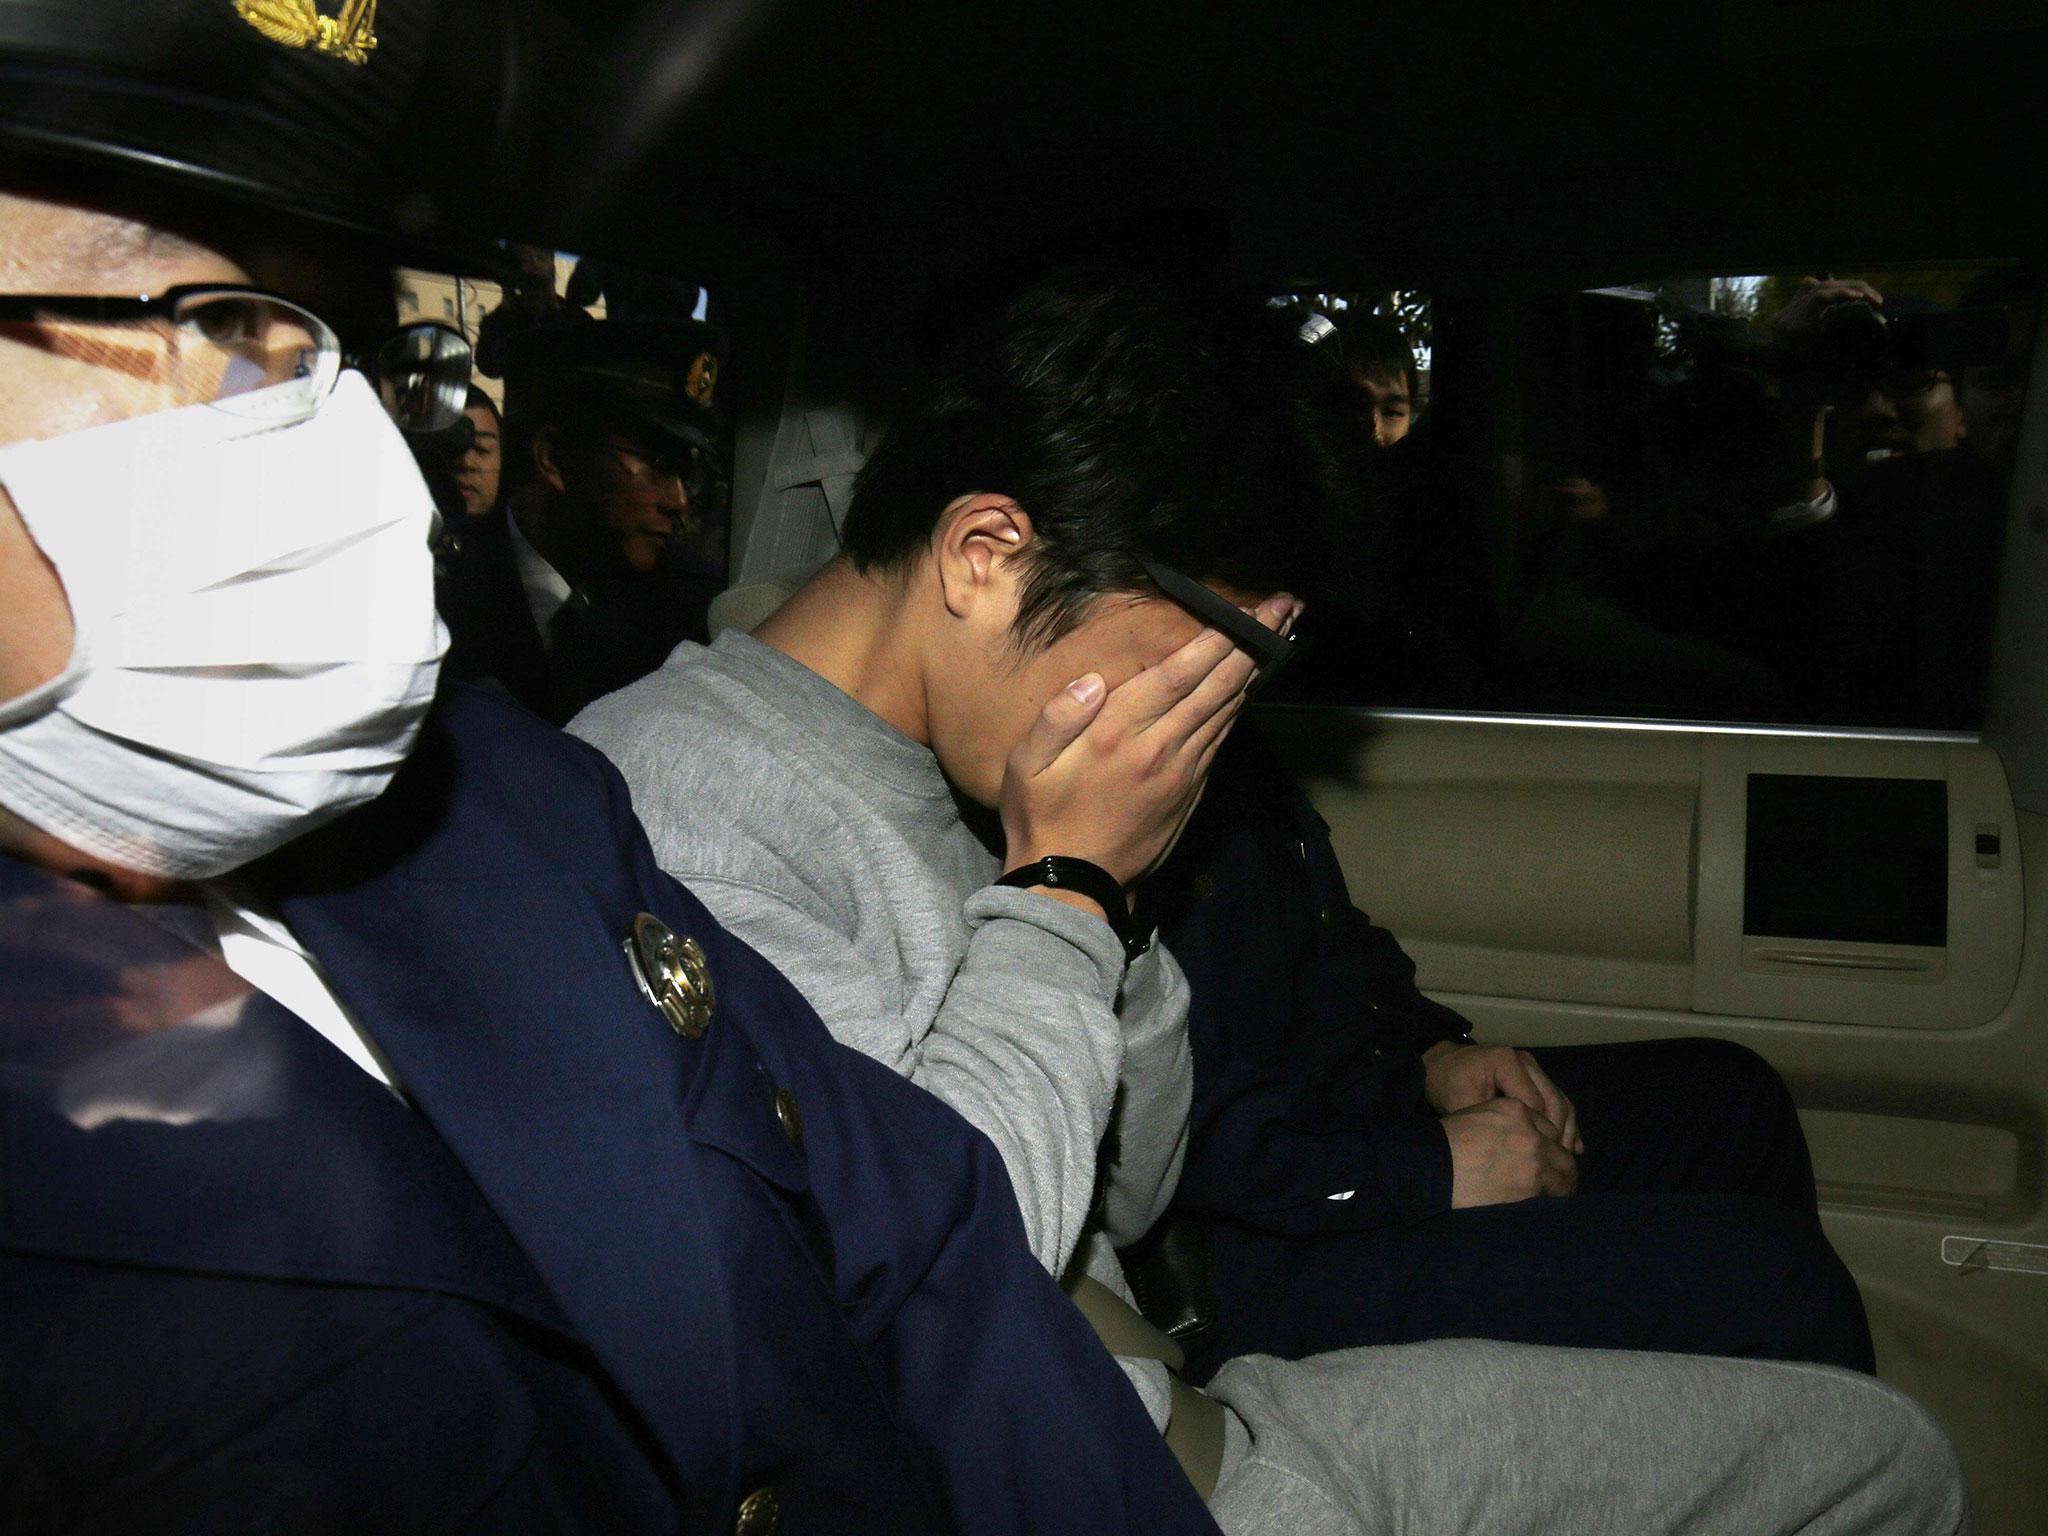 Japanese Serial Killer Behind The Murder Of Nine People Offered Images, Photos, Reviews